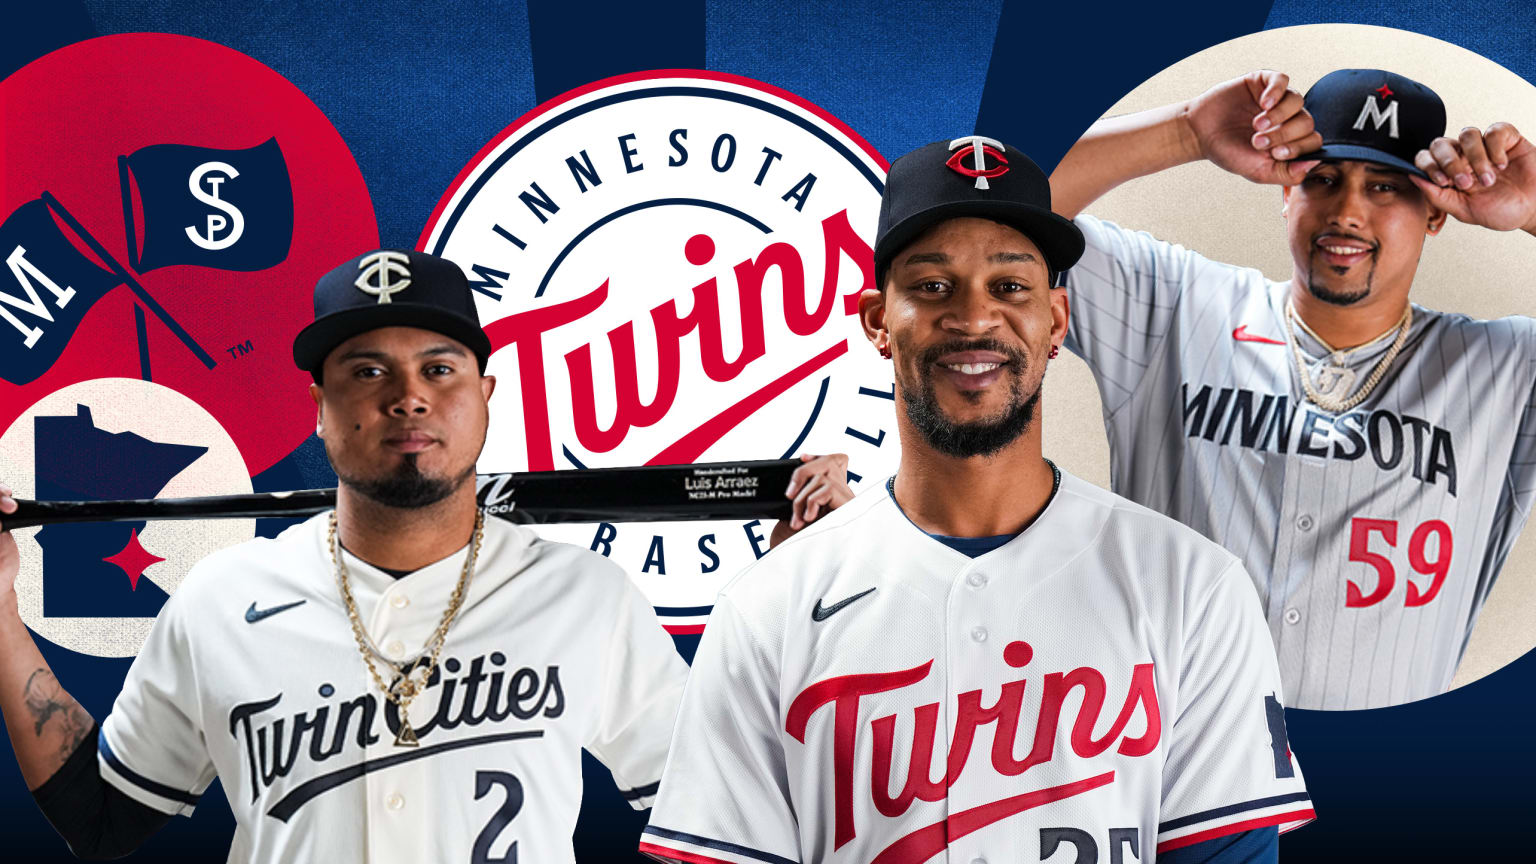 Twins players wearing the team's new uniforms